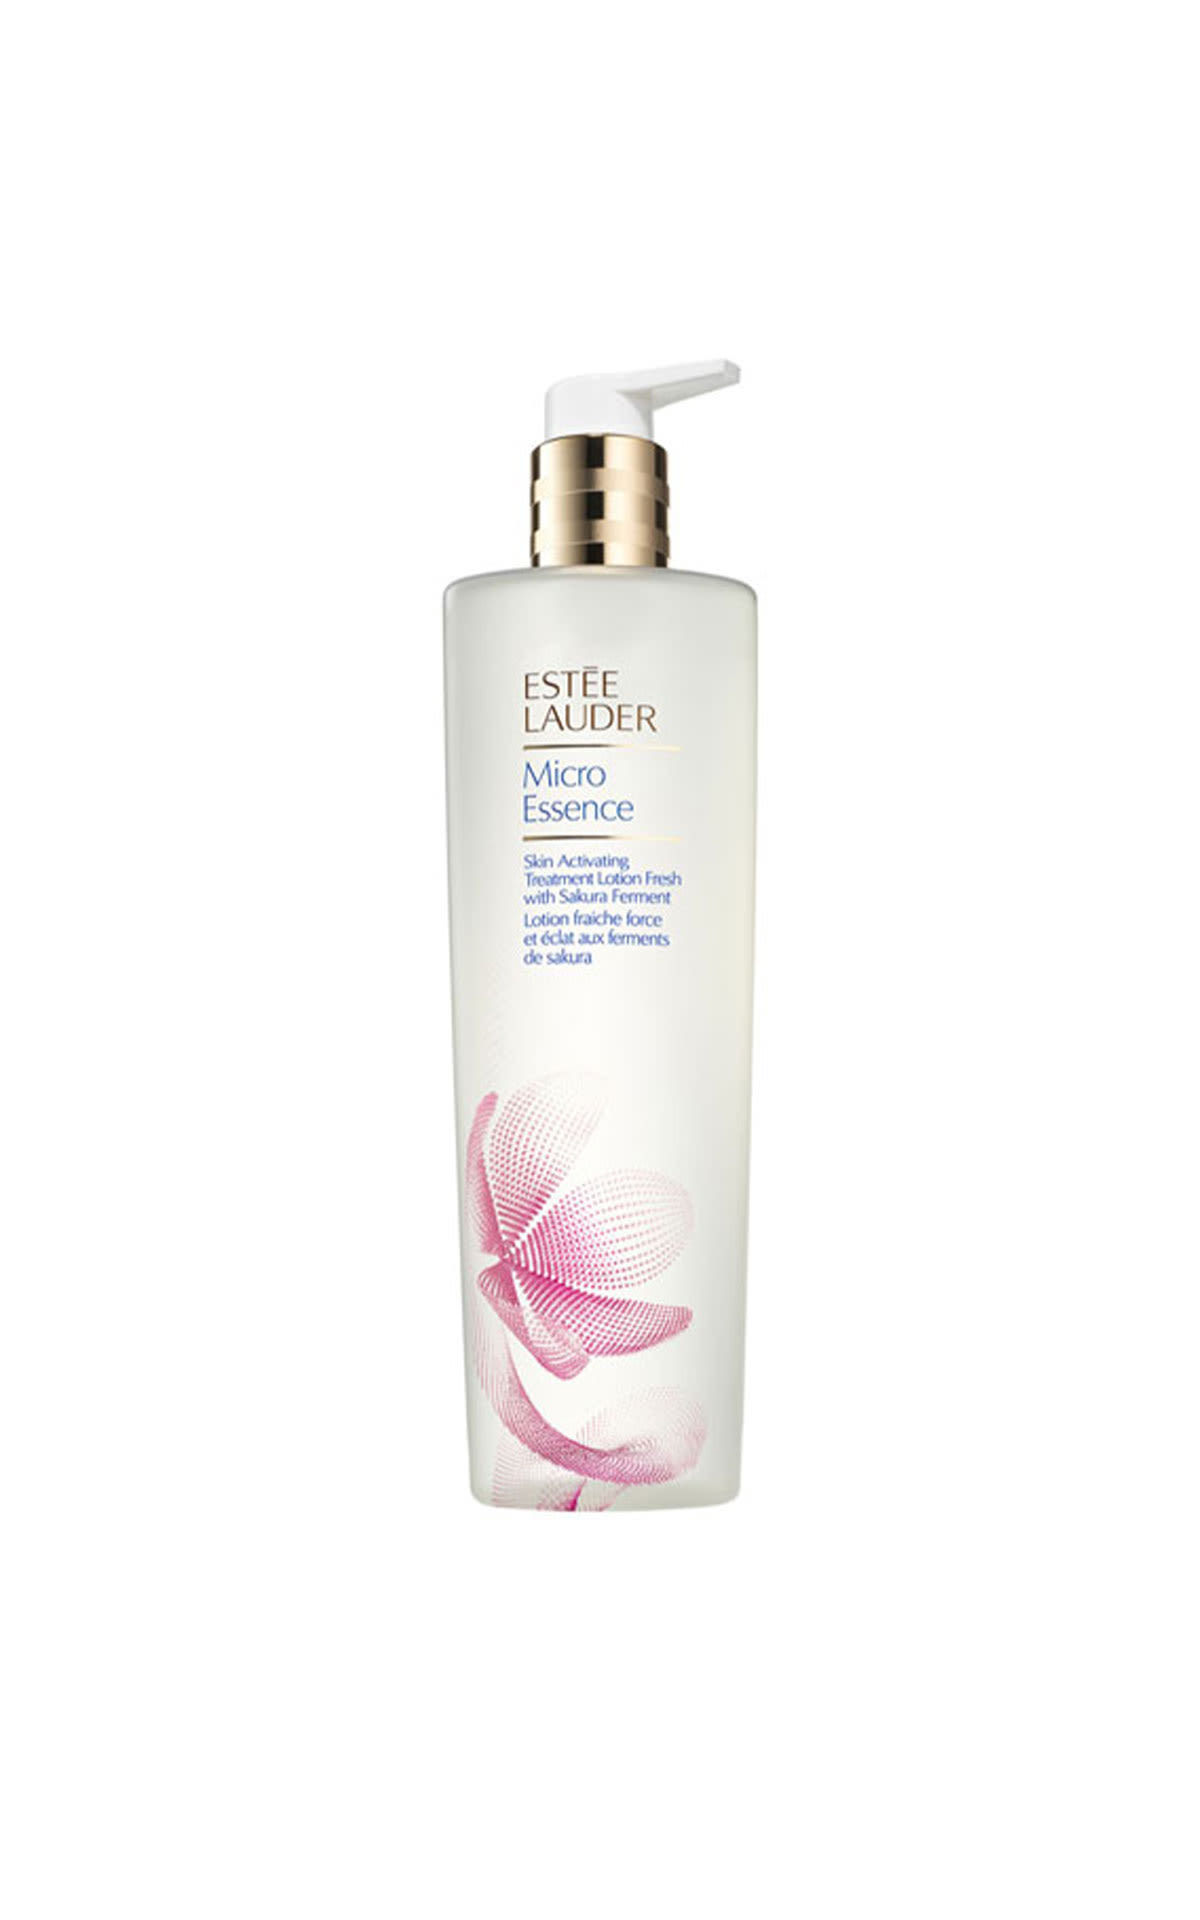 The Cosmetics Company Store Estee Lauder Mirco essence skin activating treatment lotion 400ml from Bicester Village